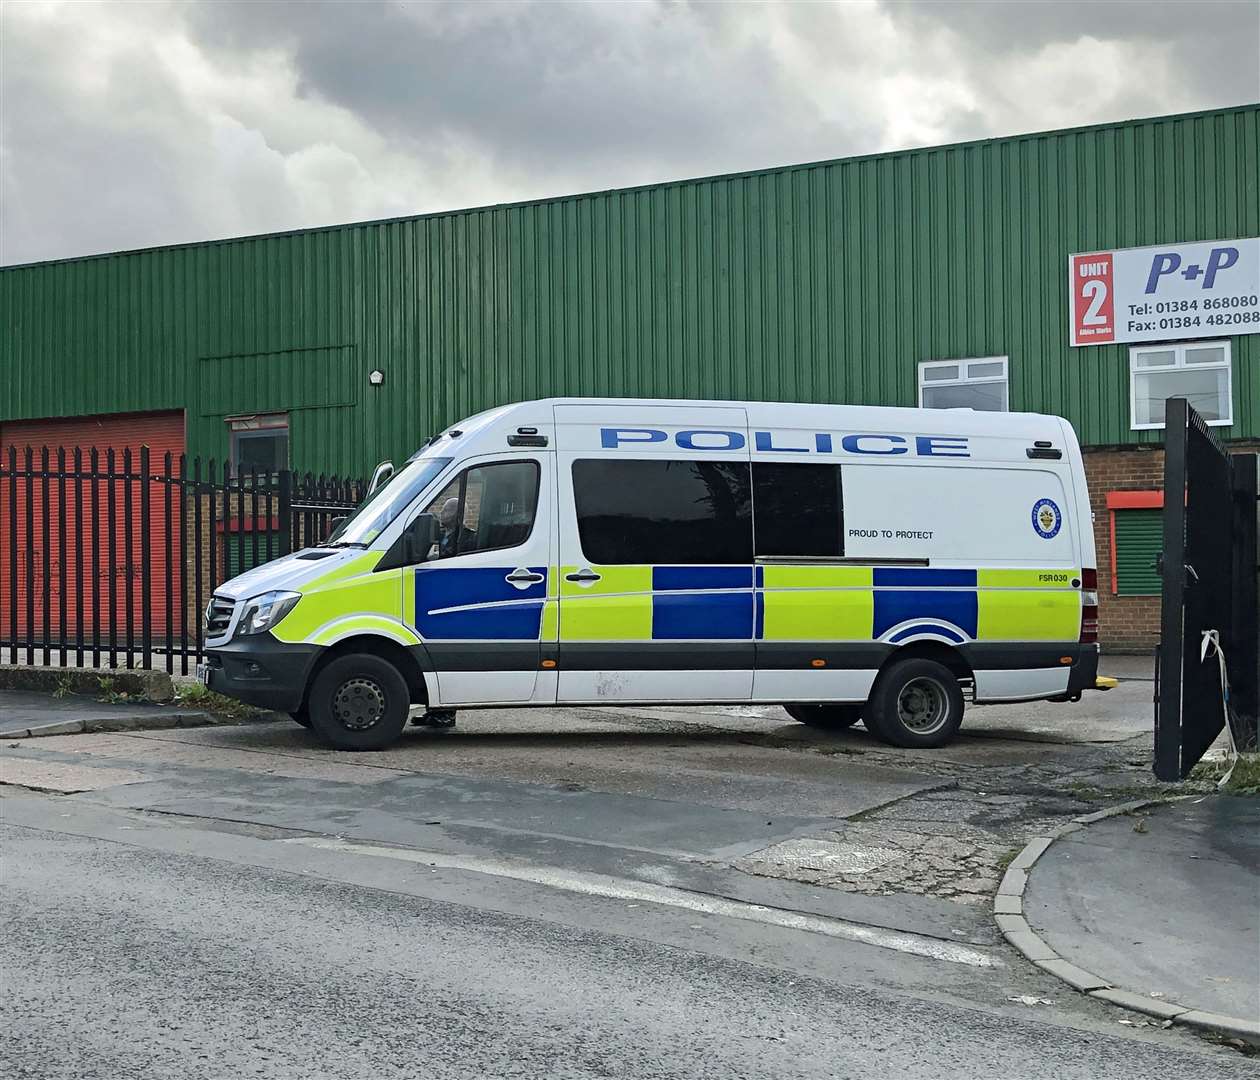 A police vehicle blocking an entrance to Albion Works industrial estate in Brierley Hill (Matthew Cooper/PA)